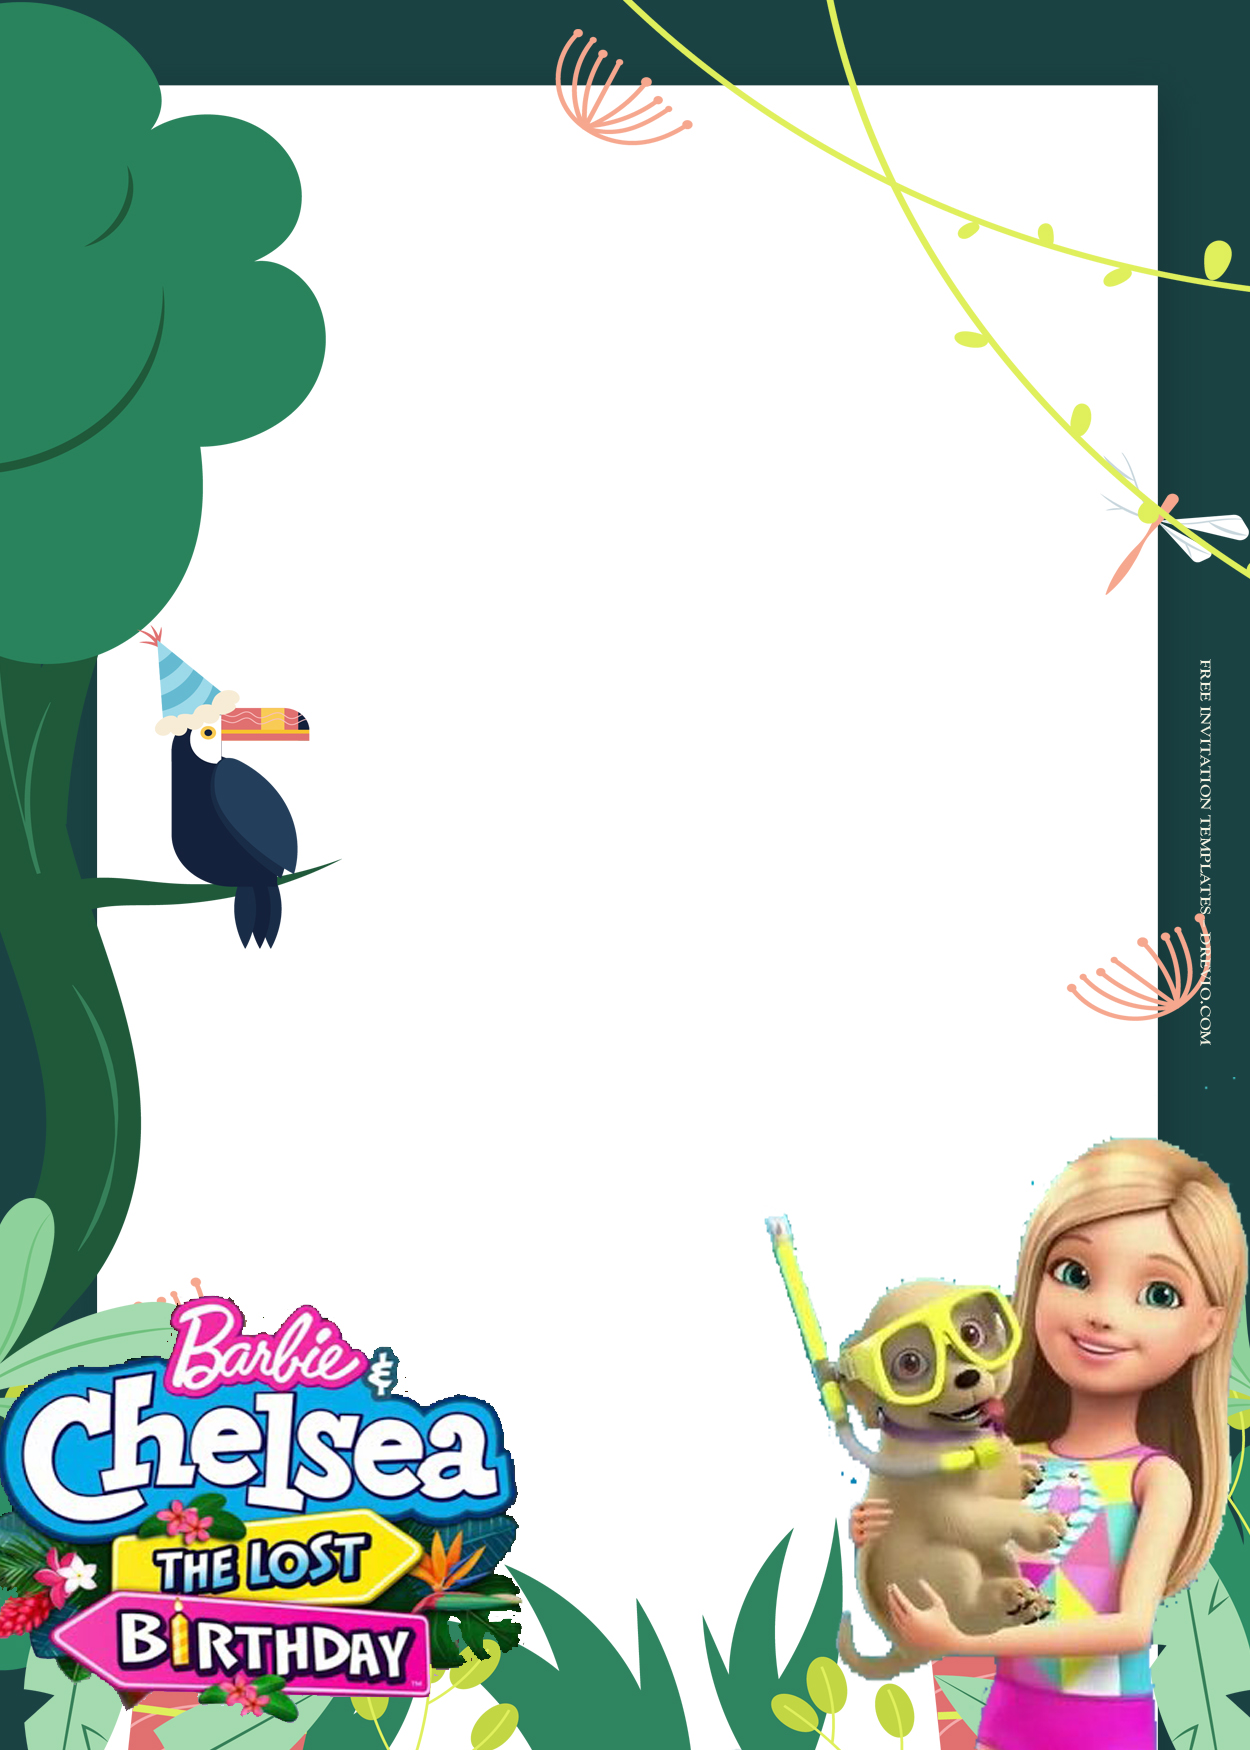 8+ Barbie And Chelsea The Lost Birthday Invitation Templates Four